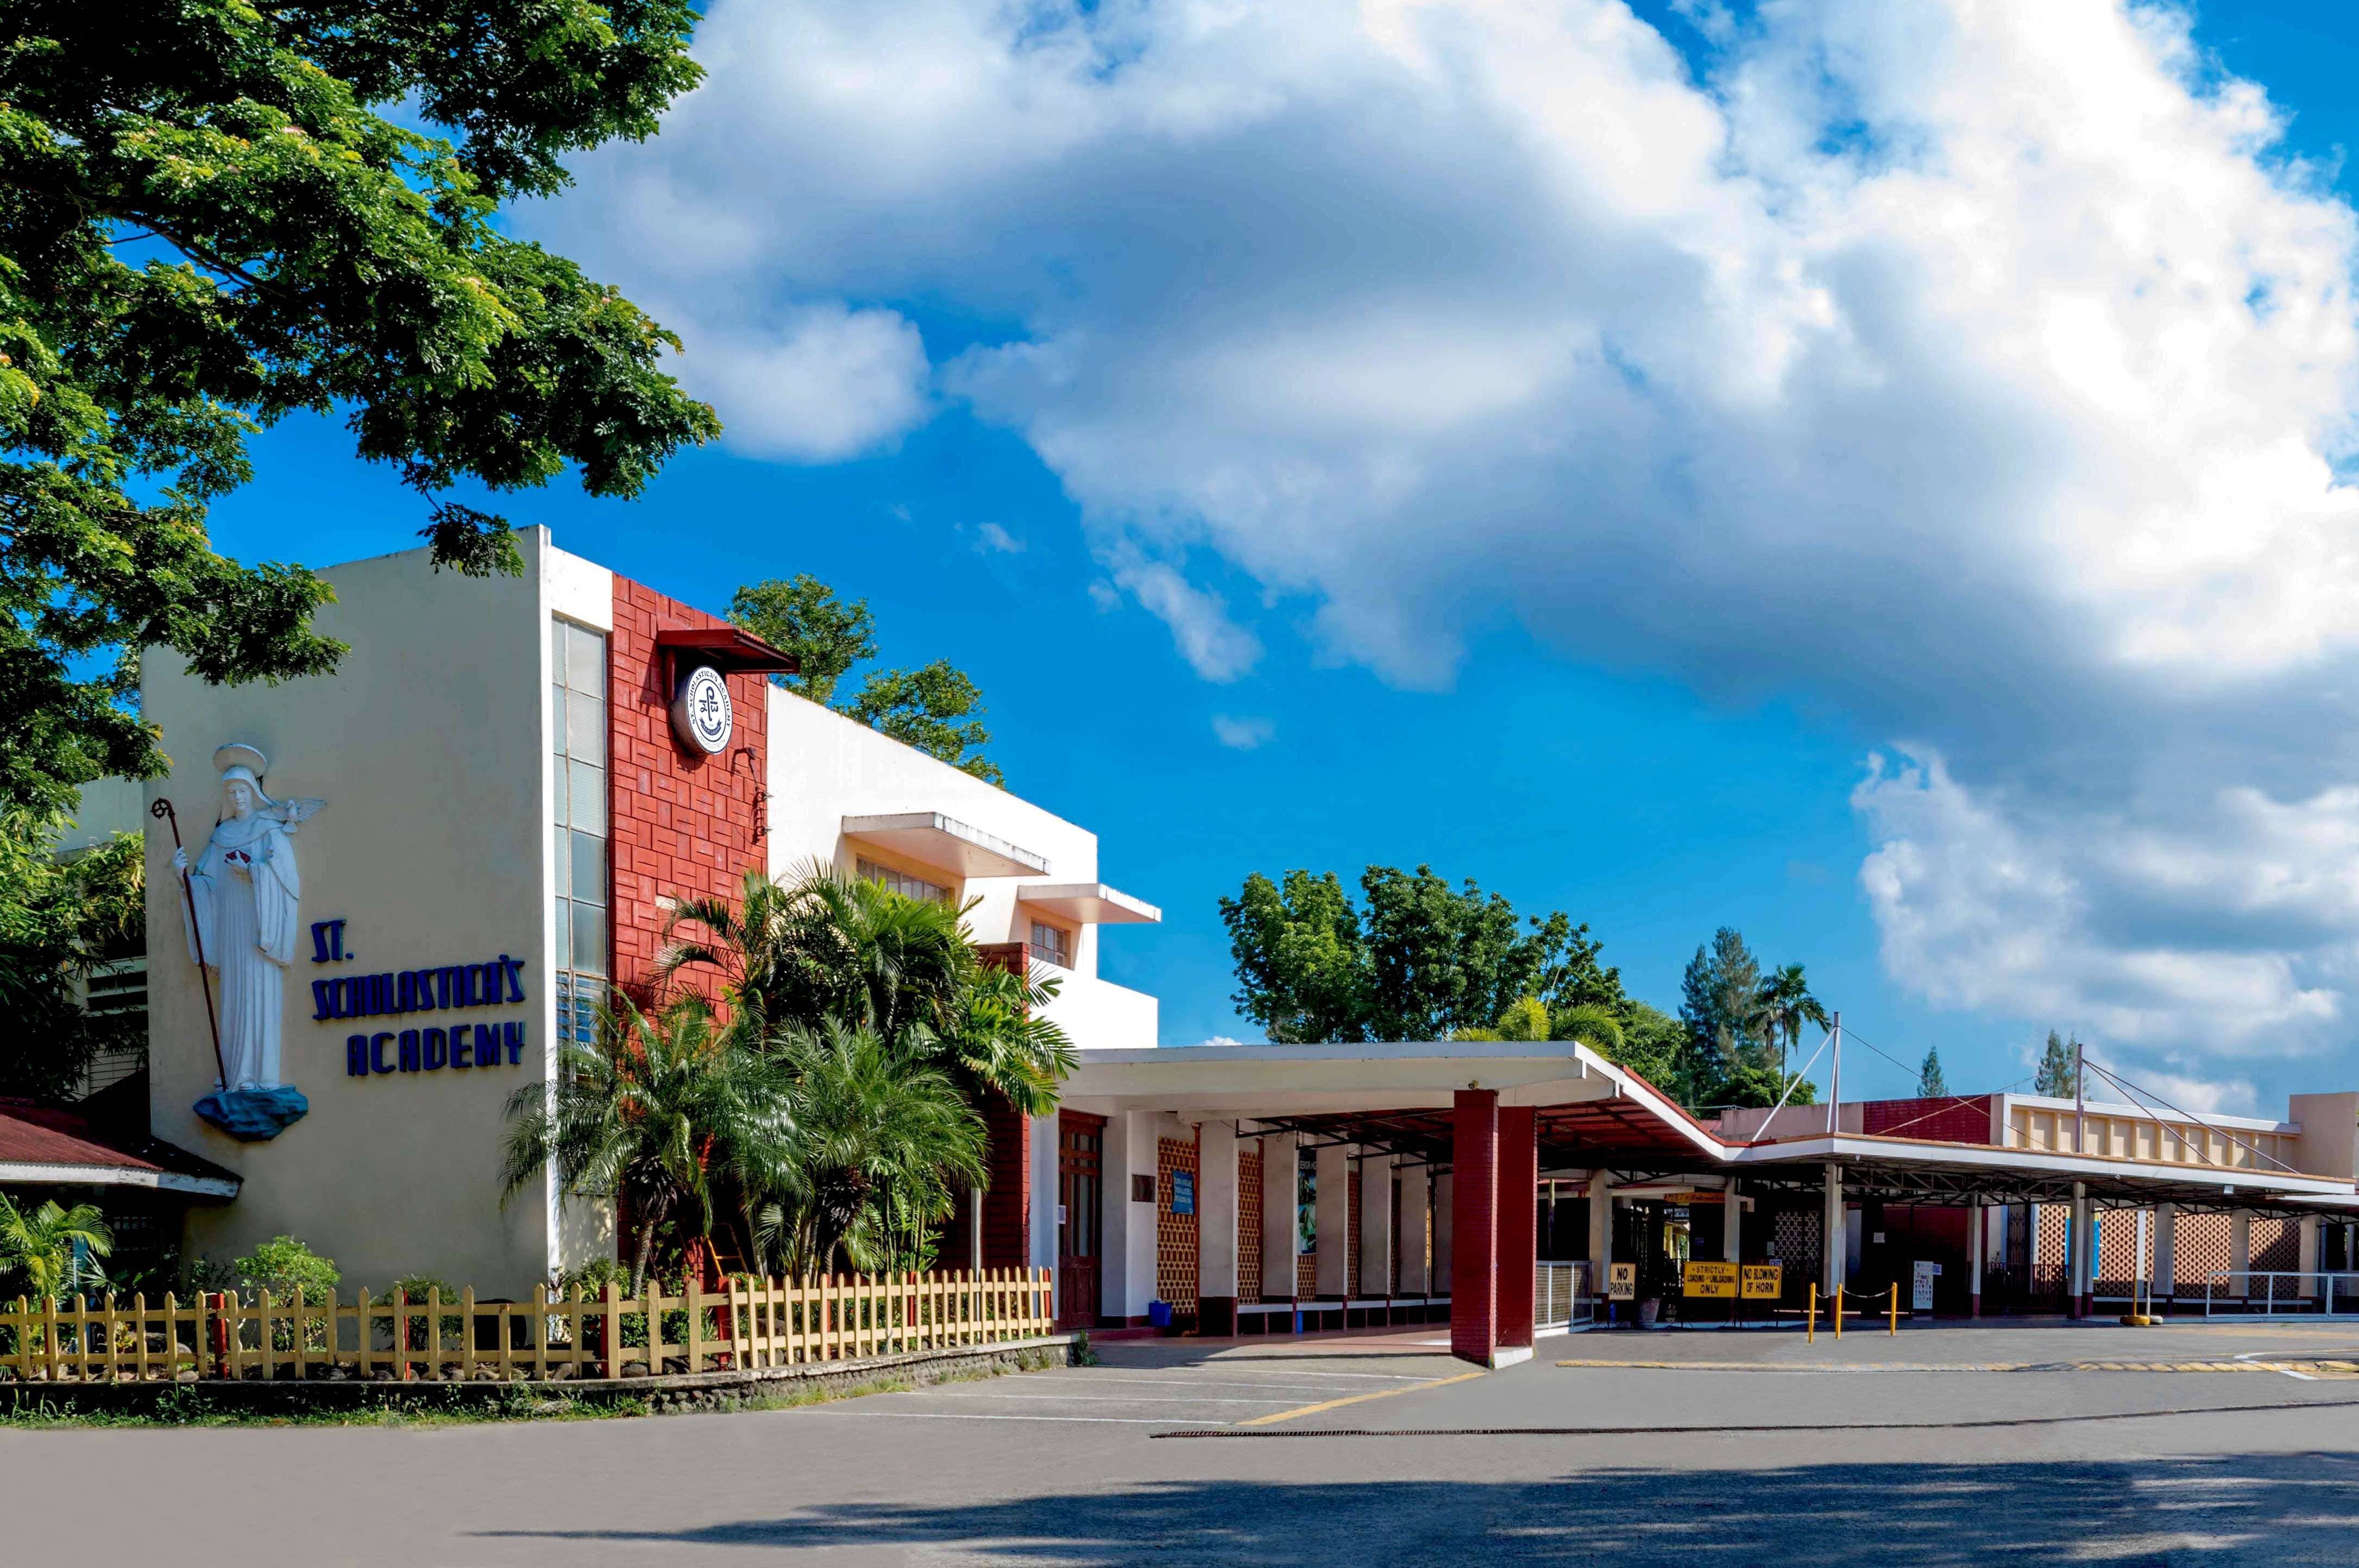 tourism school in bacolod